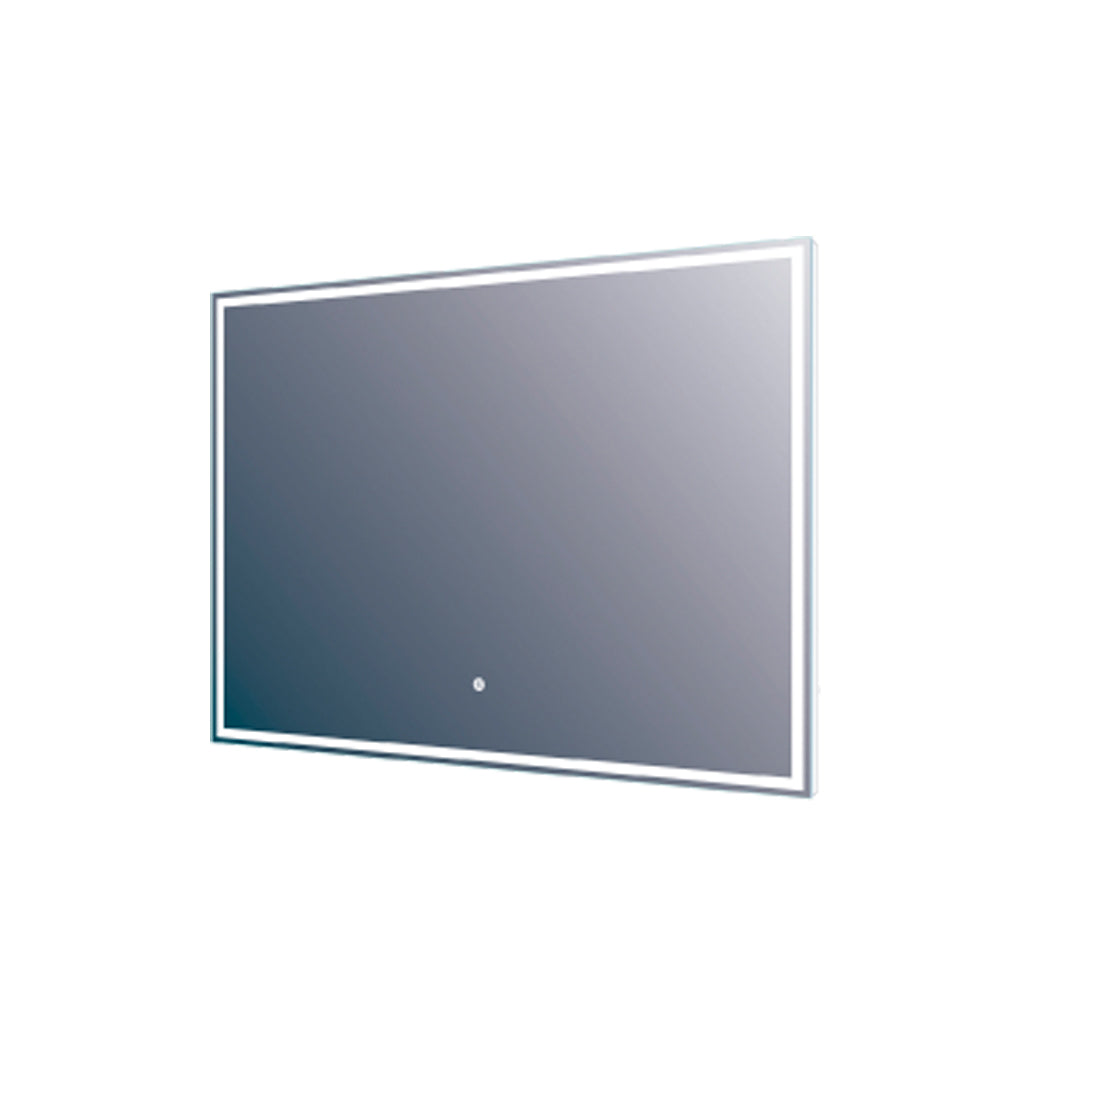 32" Mirror with 5000k LED with touch sensor. 32" x 24" (DAX-DL758060)